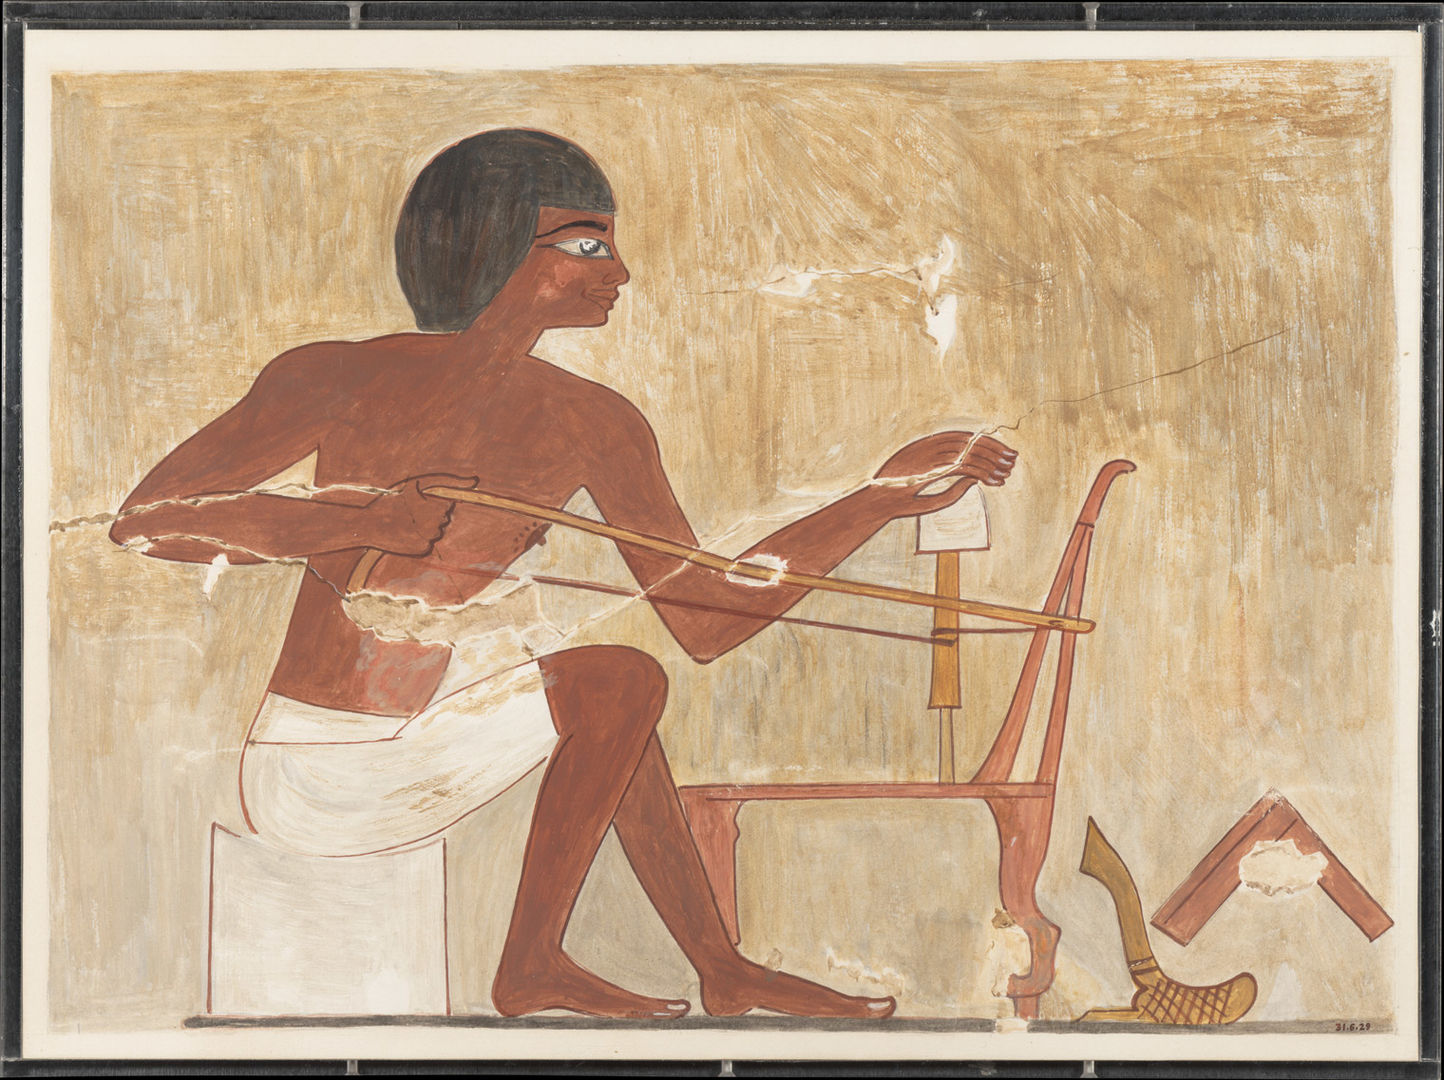 A painting of a man with dark red-brown skin seated on a low block. He uses a bow drill to work on a high-backed chair. Other carpentry tools are visible next to the chair.